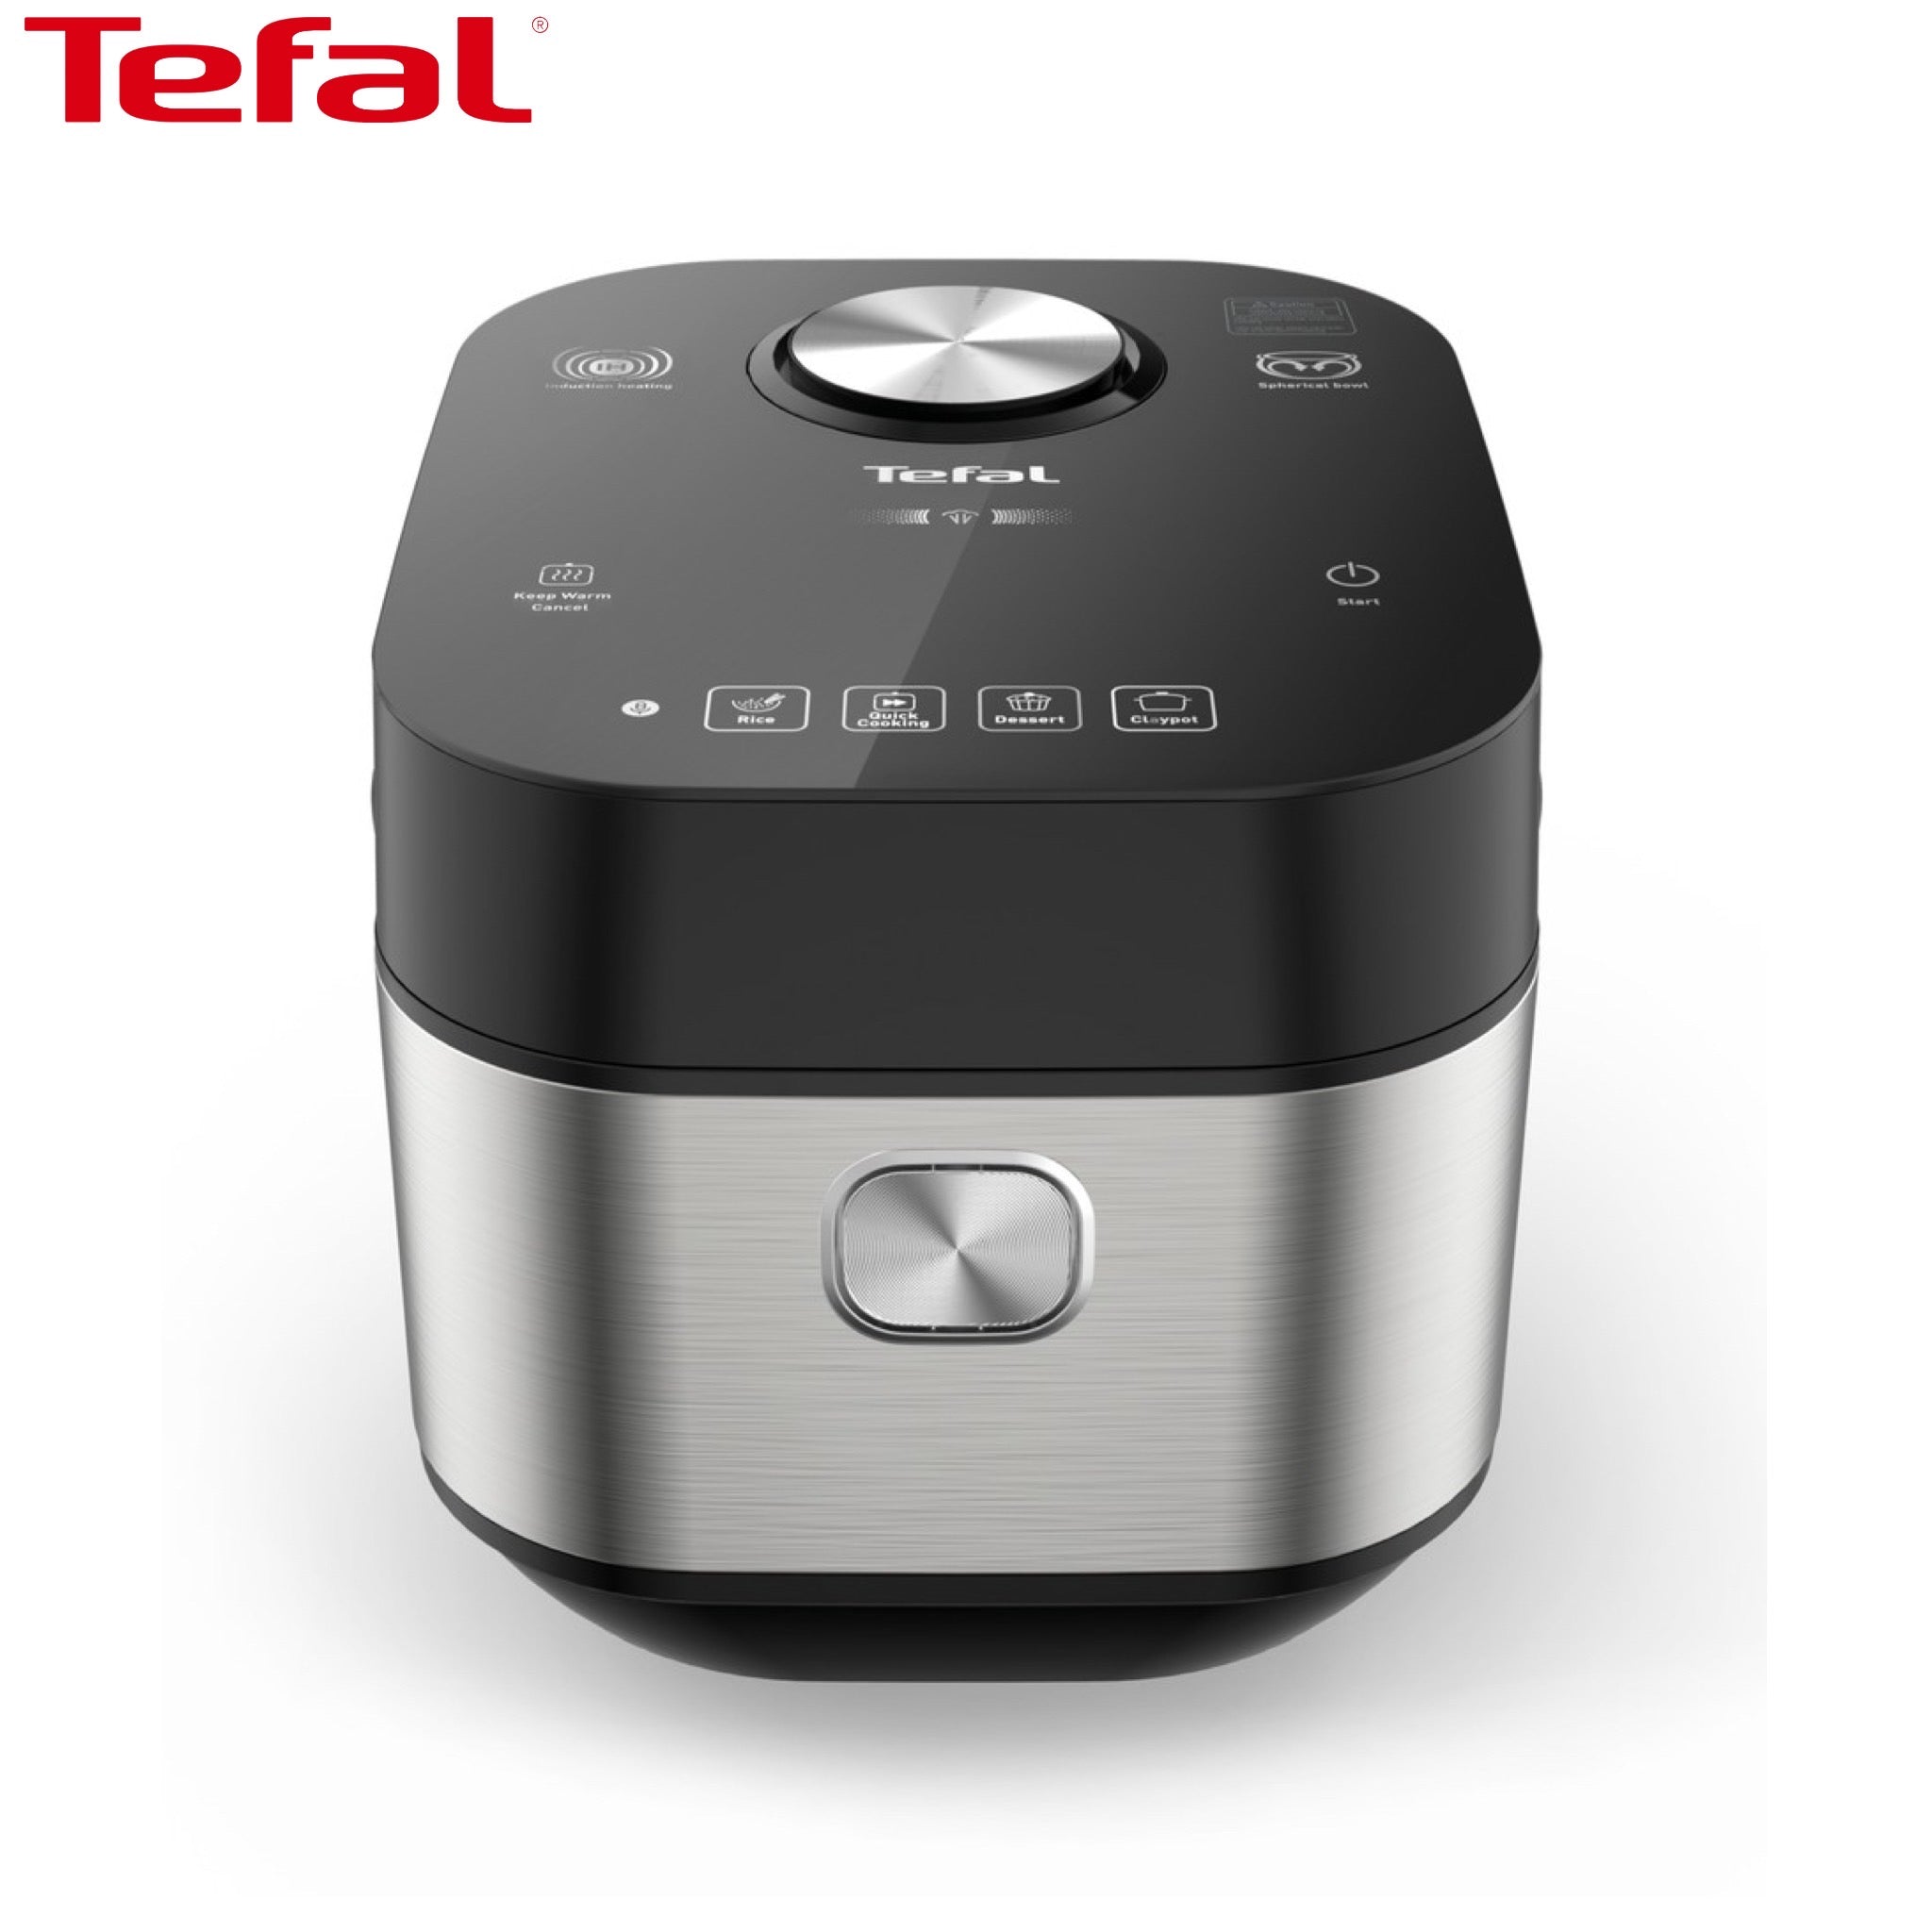 Tefal Rice Cooker Pro IH Steam - 1.8L 10 Cups,36 cooking programs,Power 1660 W